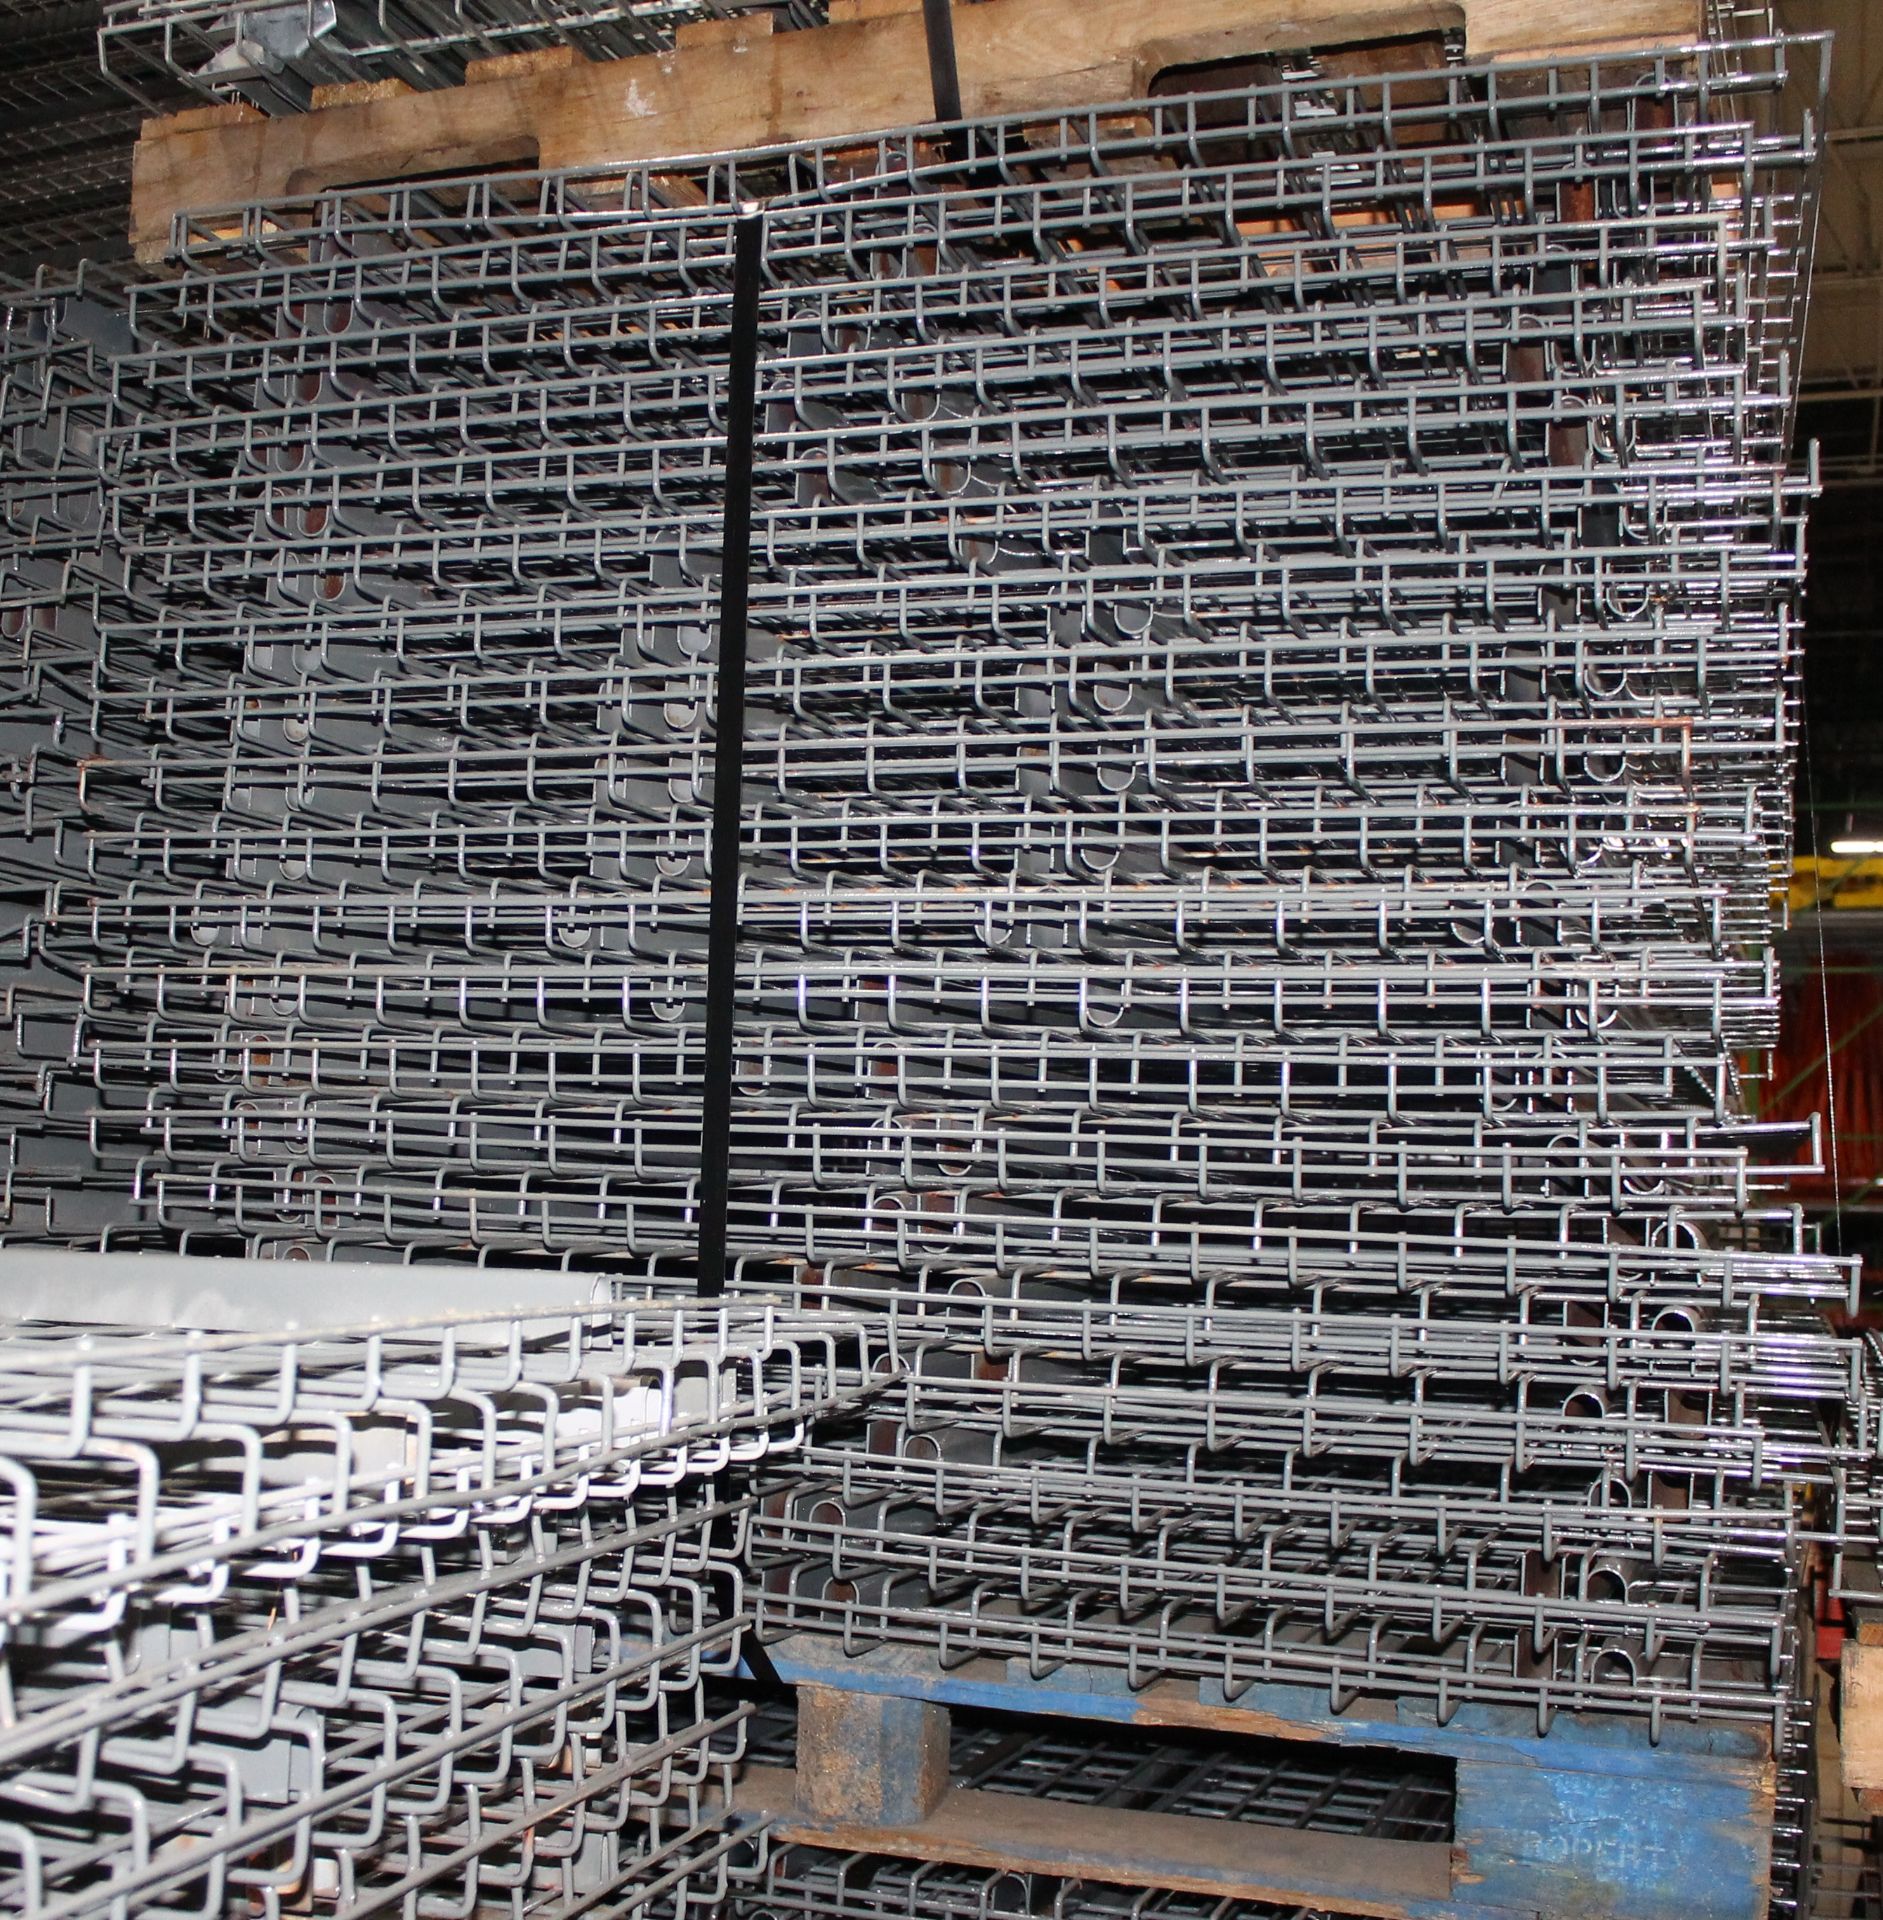 40 PCS OF WIREDECK 42 X 46 STANDARED DOUBLE SIDE WATERFALL - Image 3 of 3